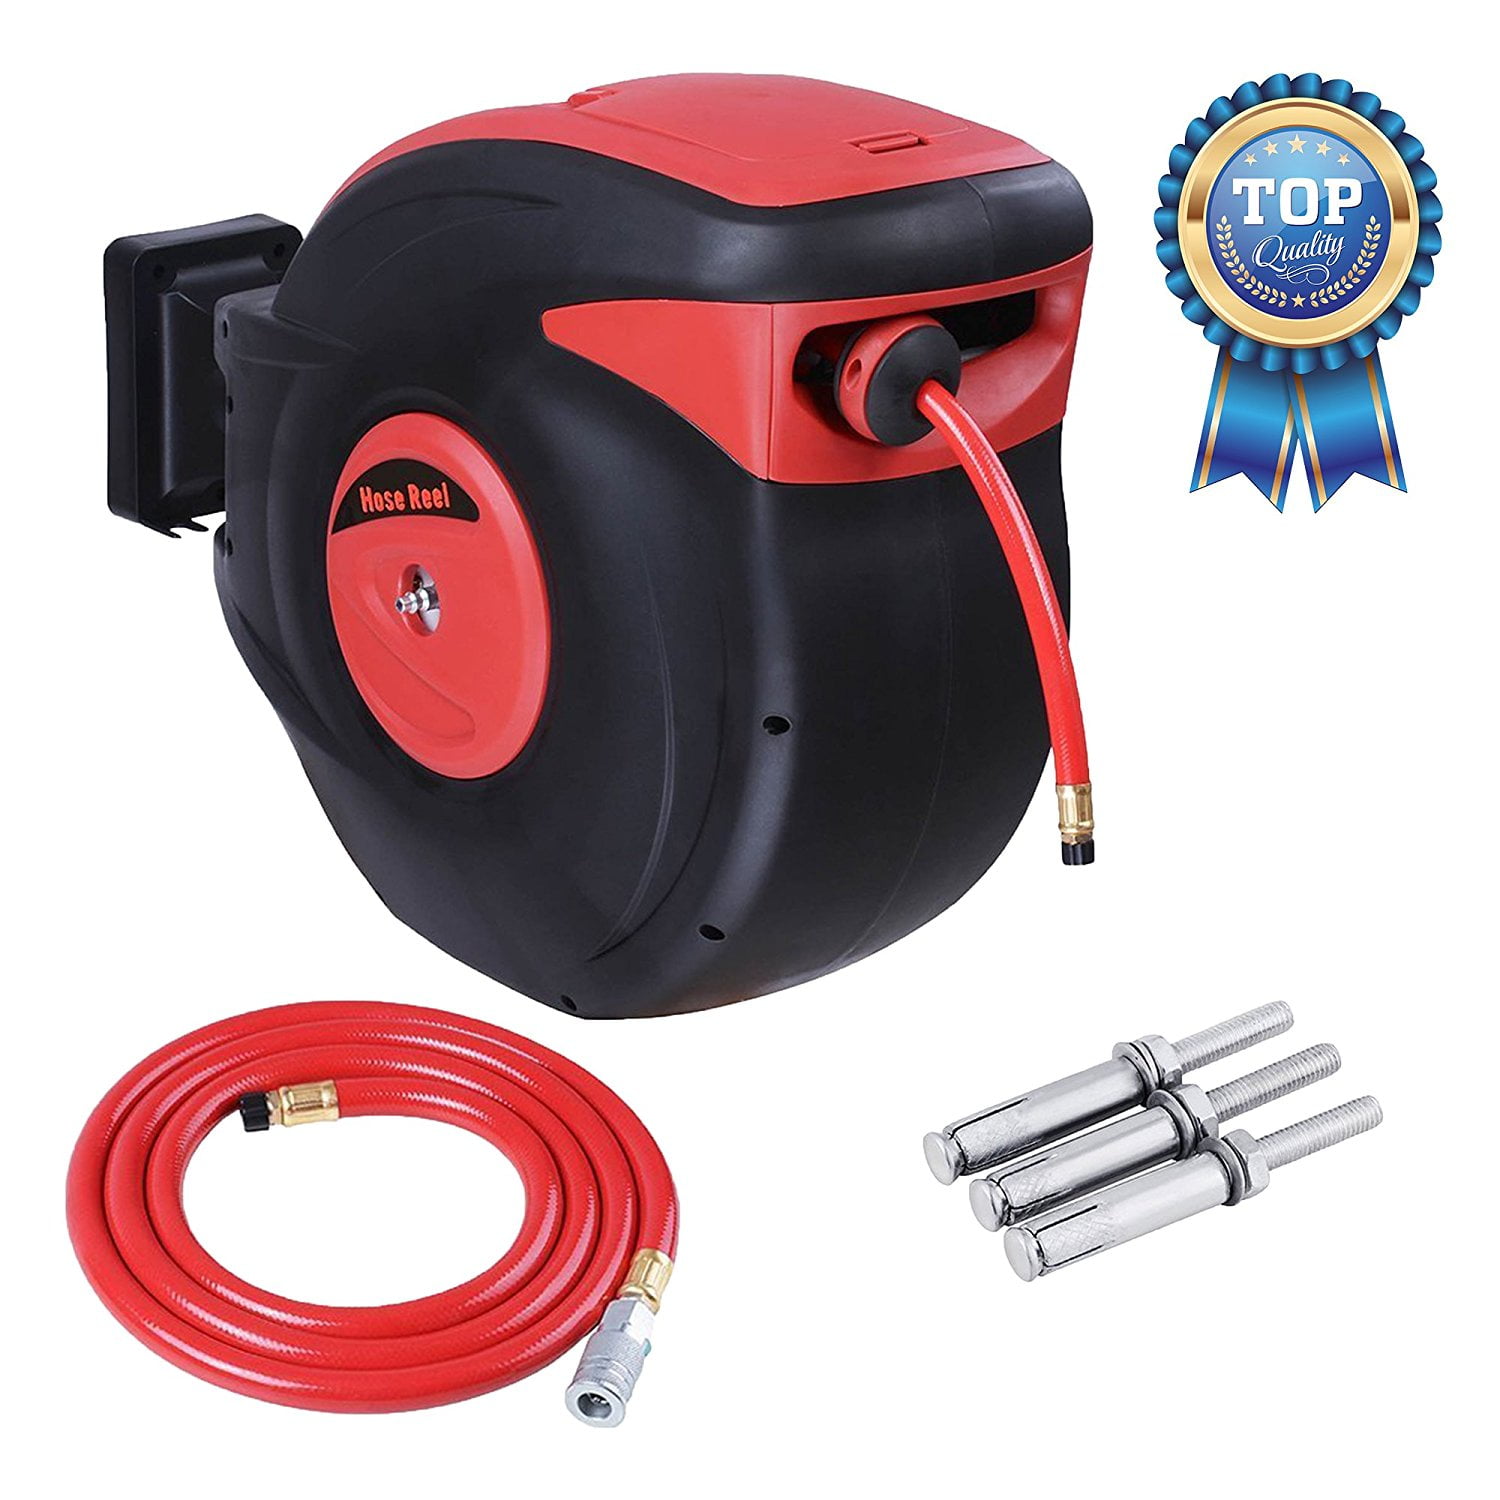 Koval Inc. 100 ft. long 3/8 Wall Mount Auto Retractable Air Hose Reel  (100FT, Red/Black) 